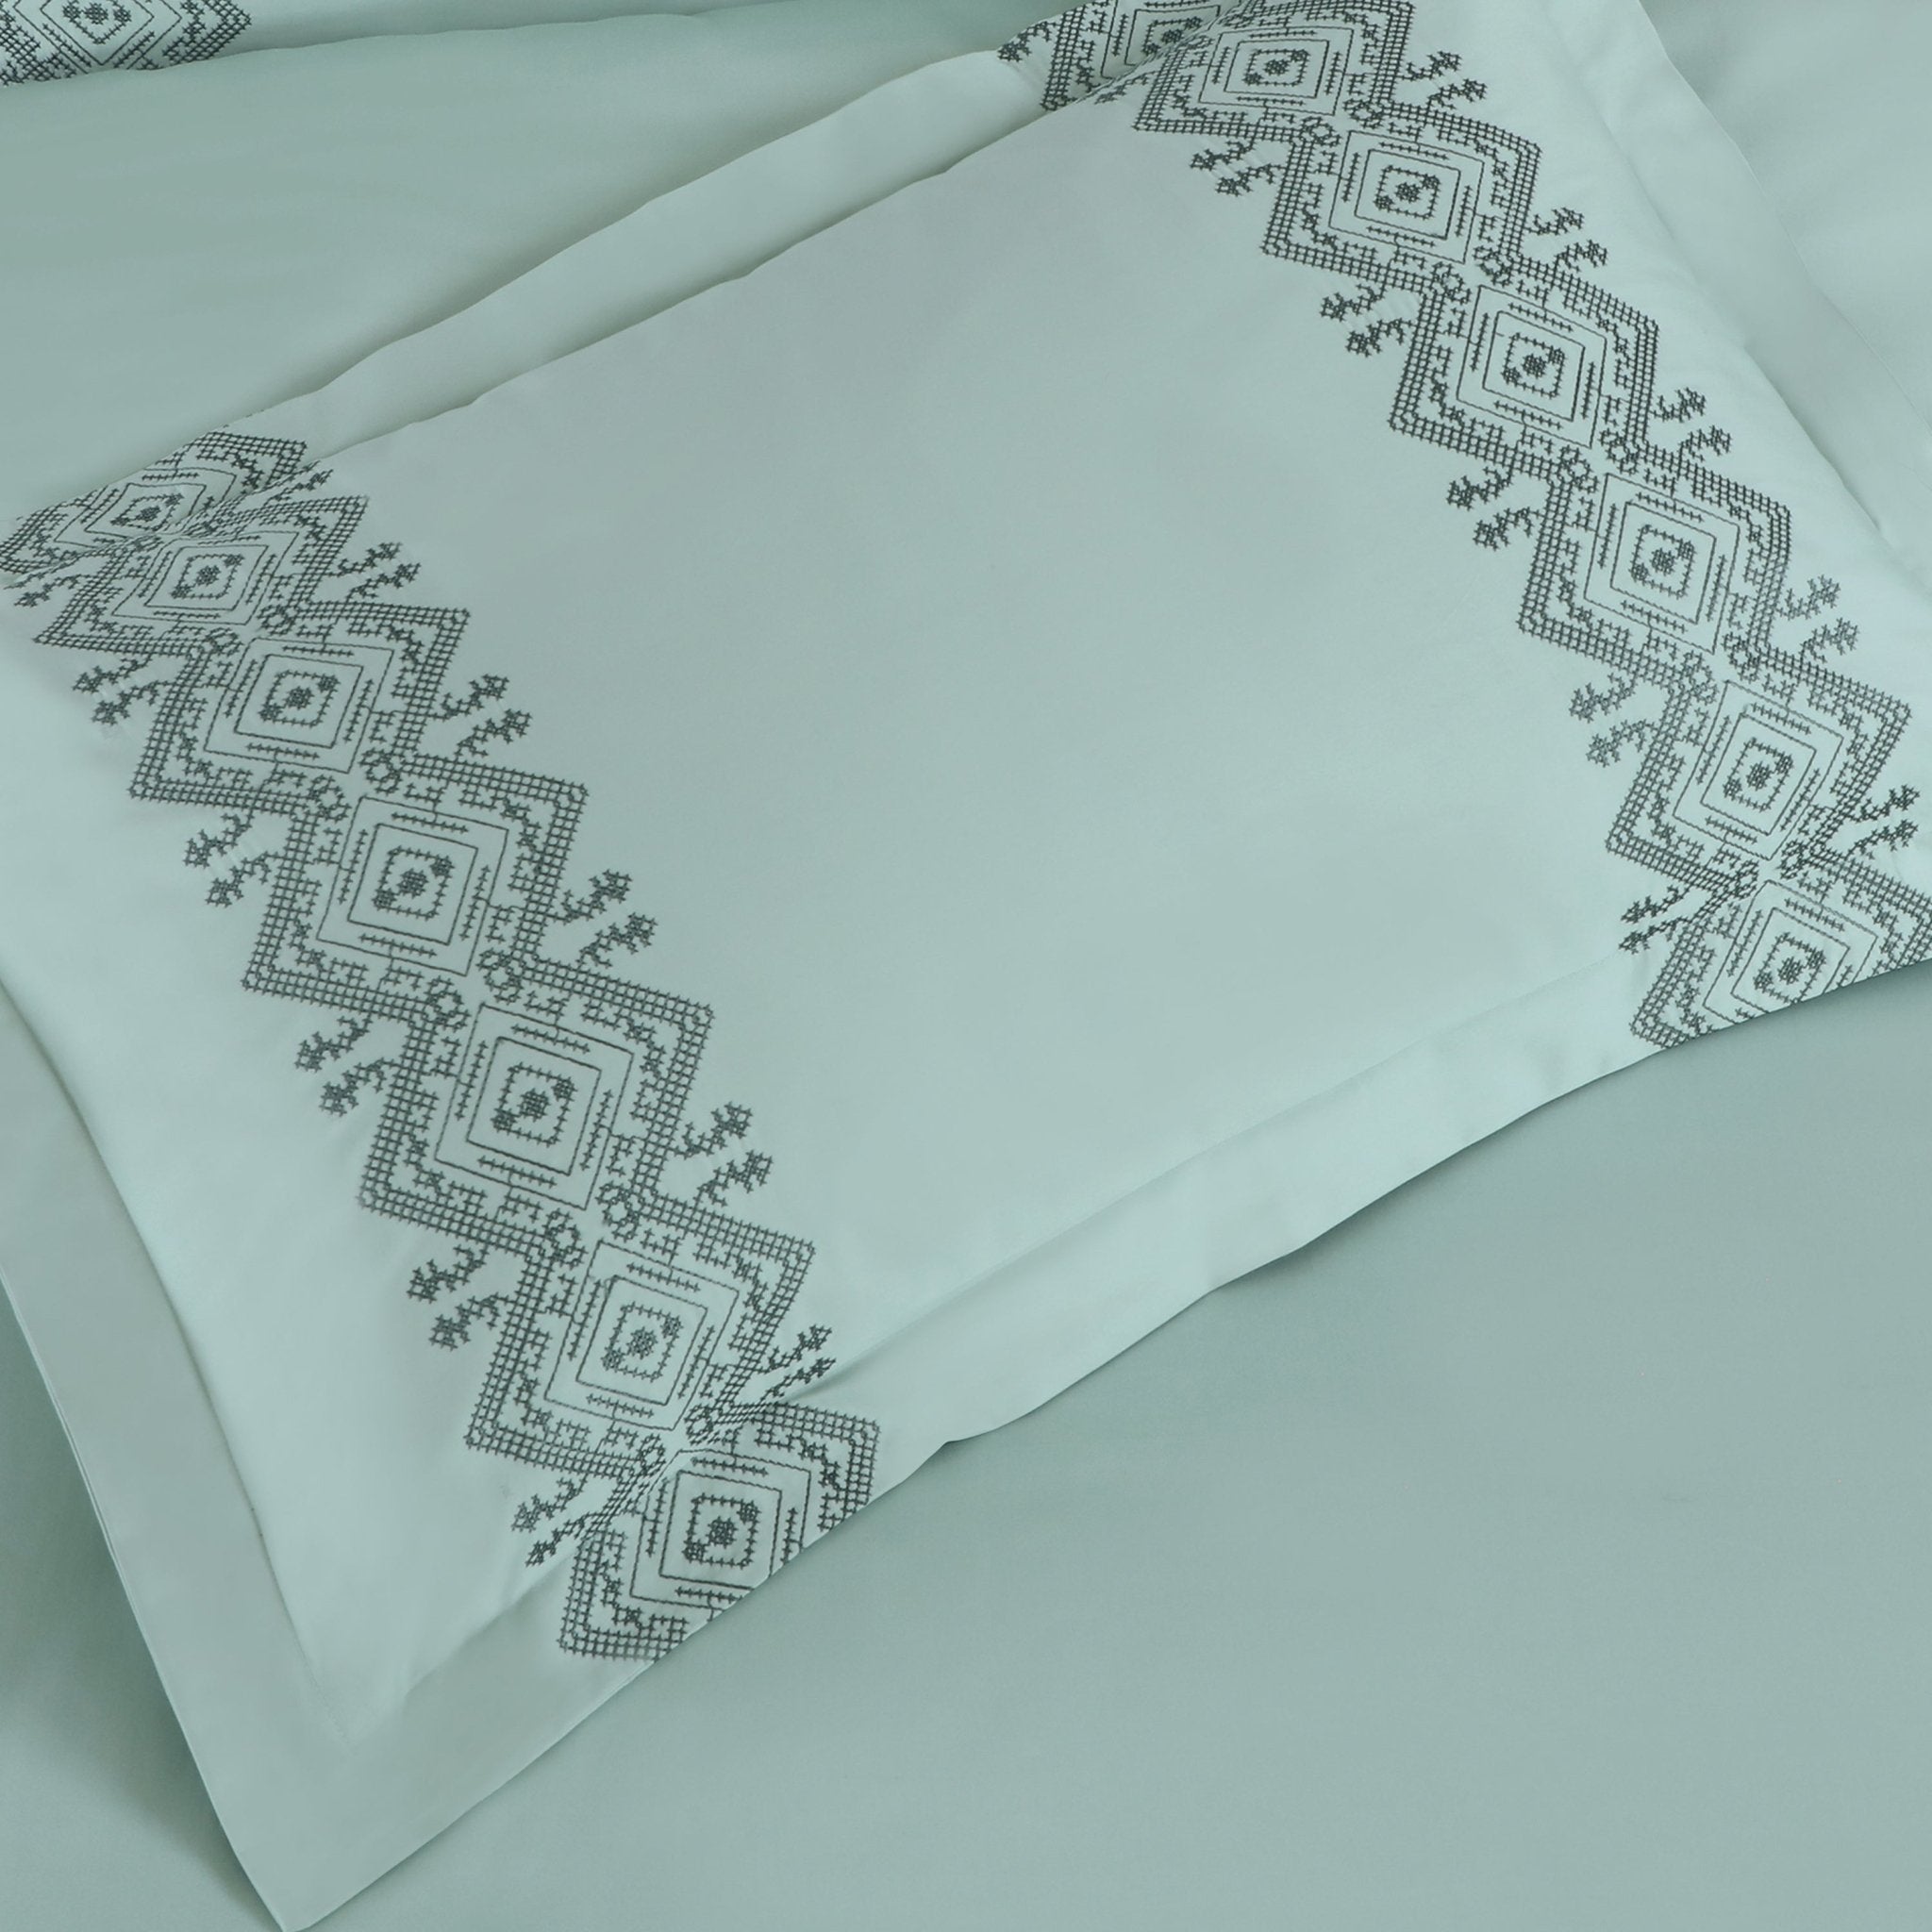 Malako Luxe Collection: 550 TC Mint Green Premium Embroidered Bedding - MALAKO